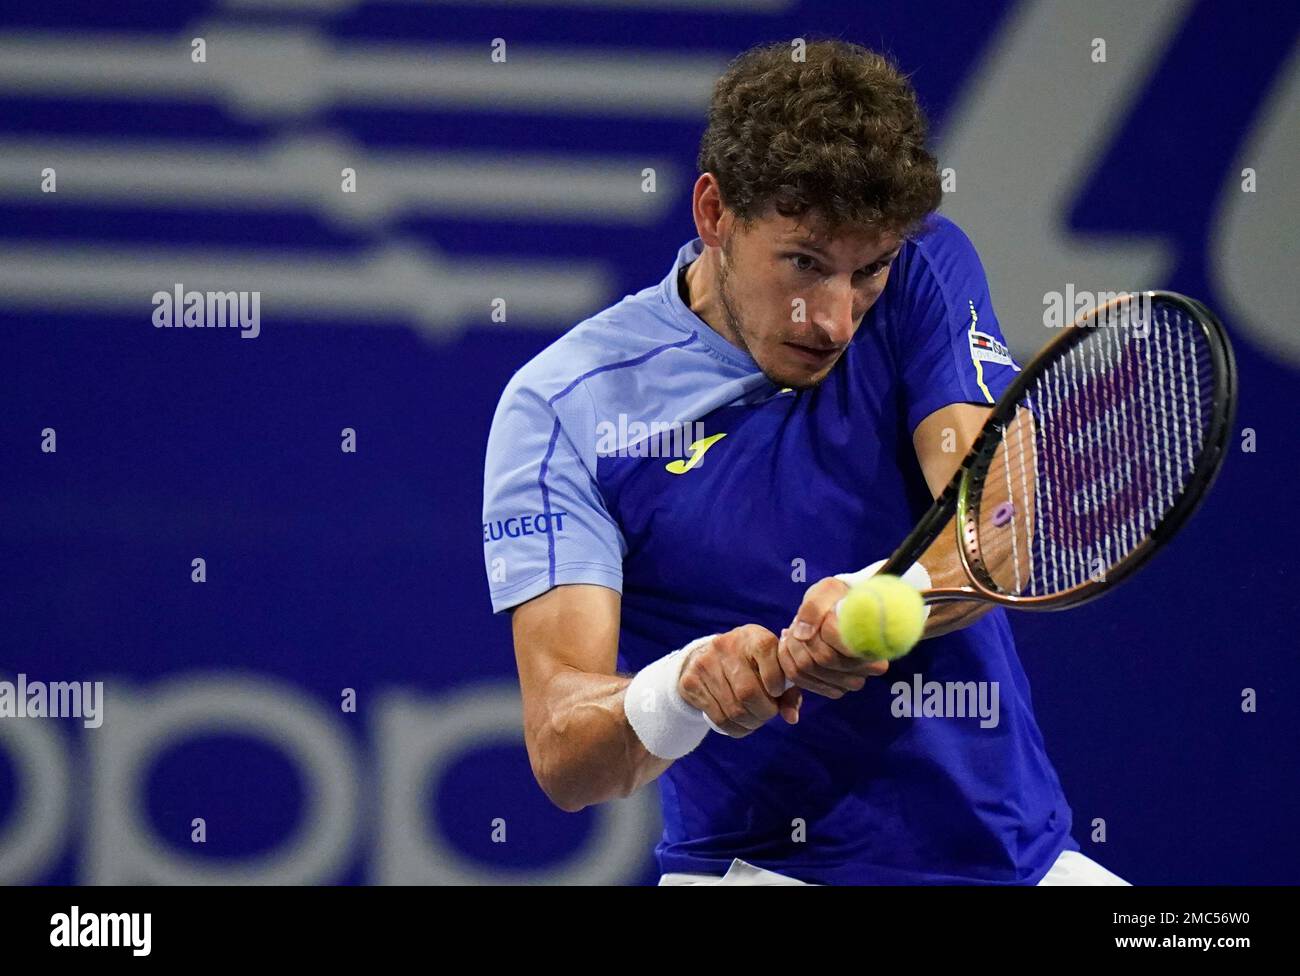 Pablo Carreno Busta, of Spain, returns a ball to Oscar Otte, of Germany, during their match at the Mexican Open tennis tournament in Acapulco, Mexico, Monday, Feb